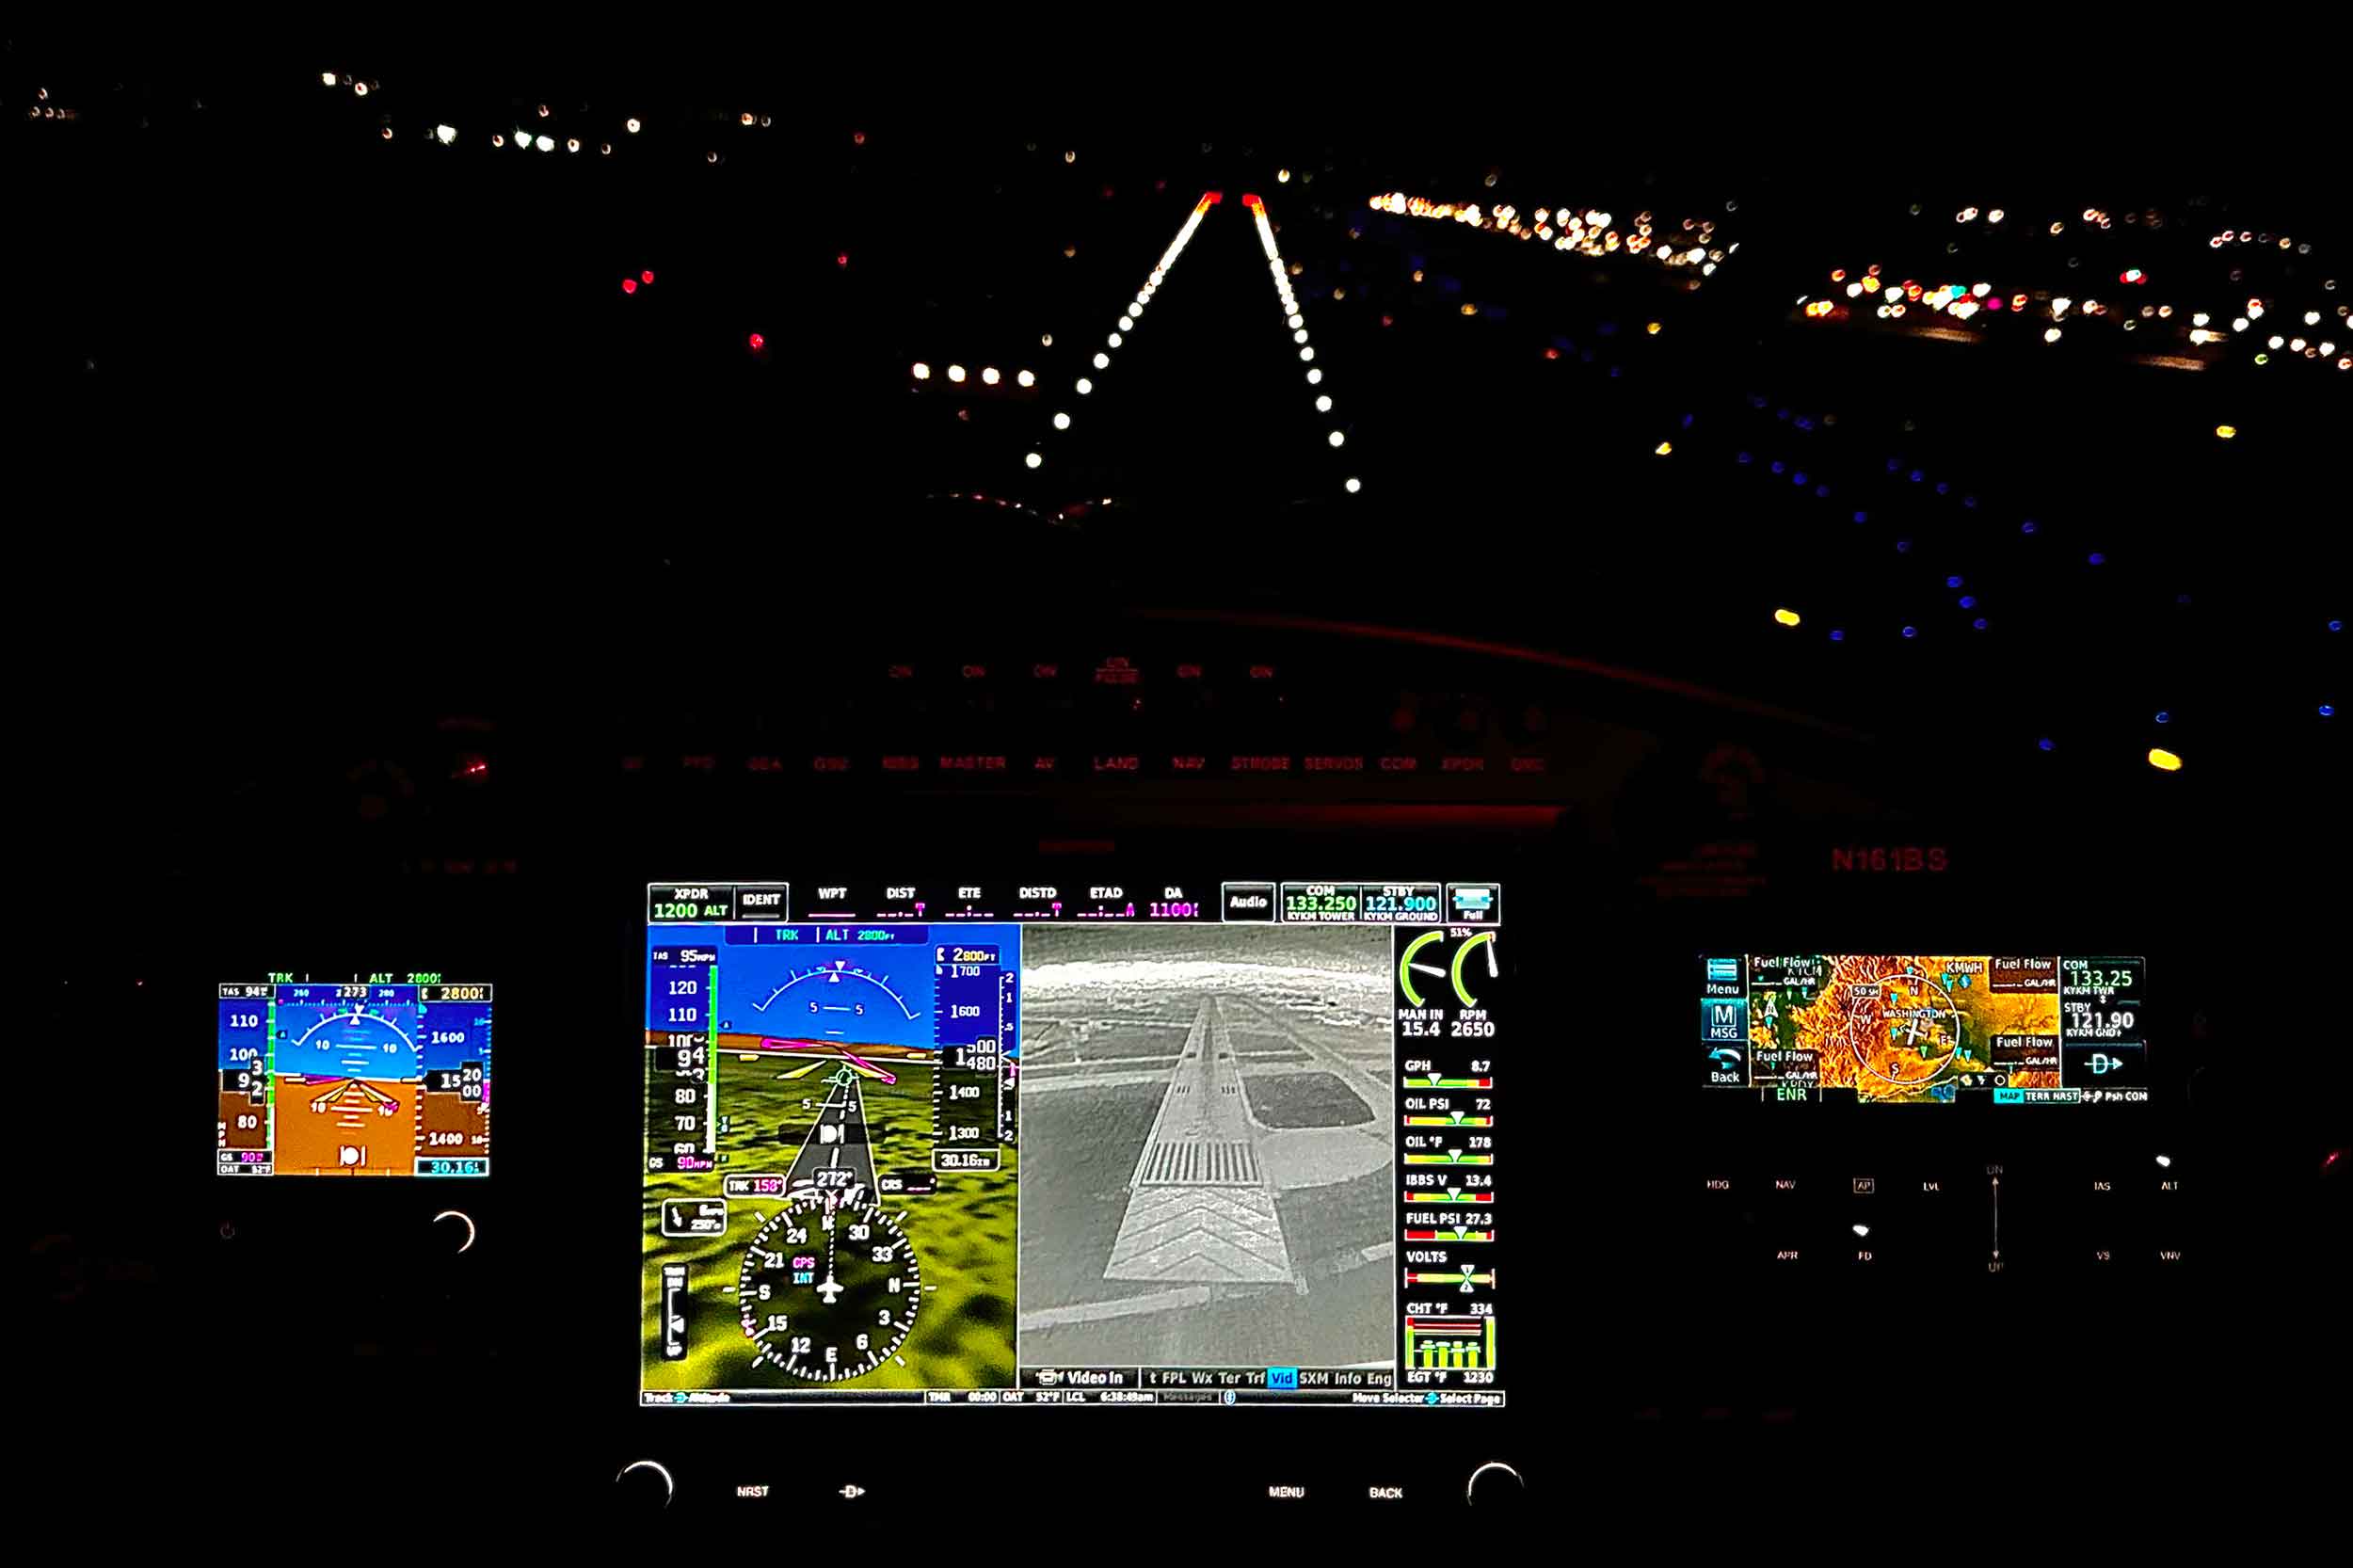 IR camera equipped Carbon Cub on final for Runway 27 at night